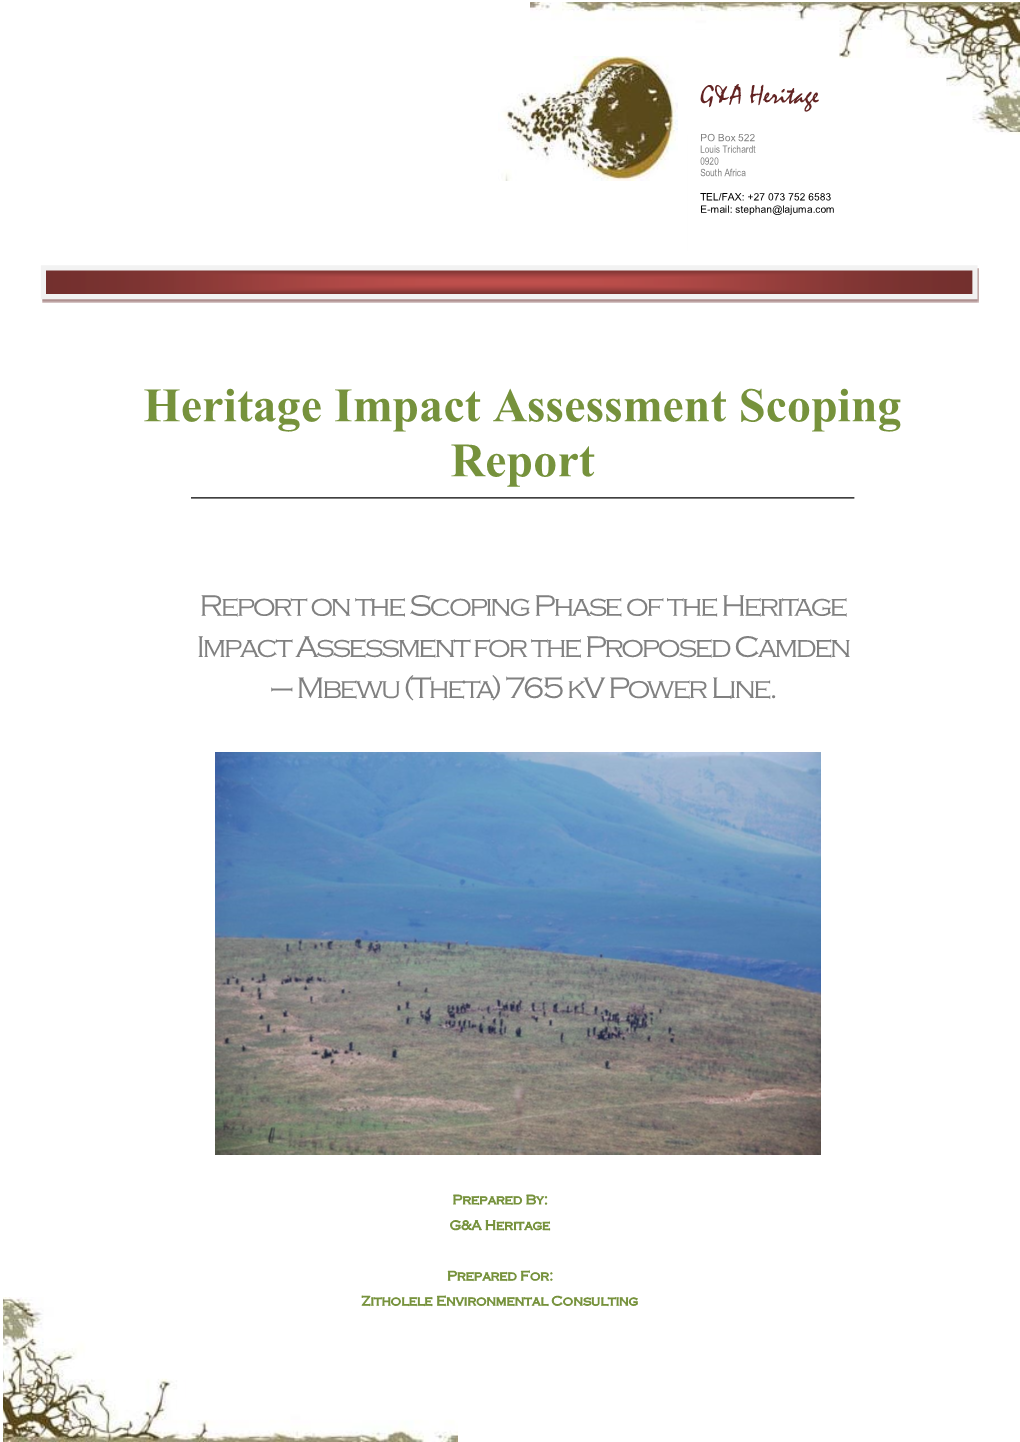 Heritage Impact Assessment Scoping Report